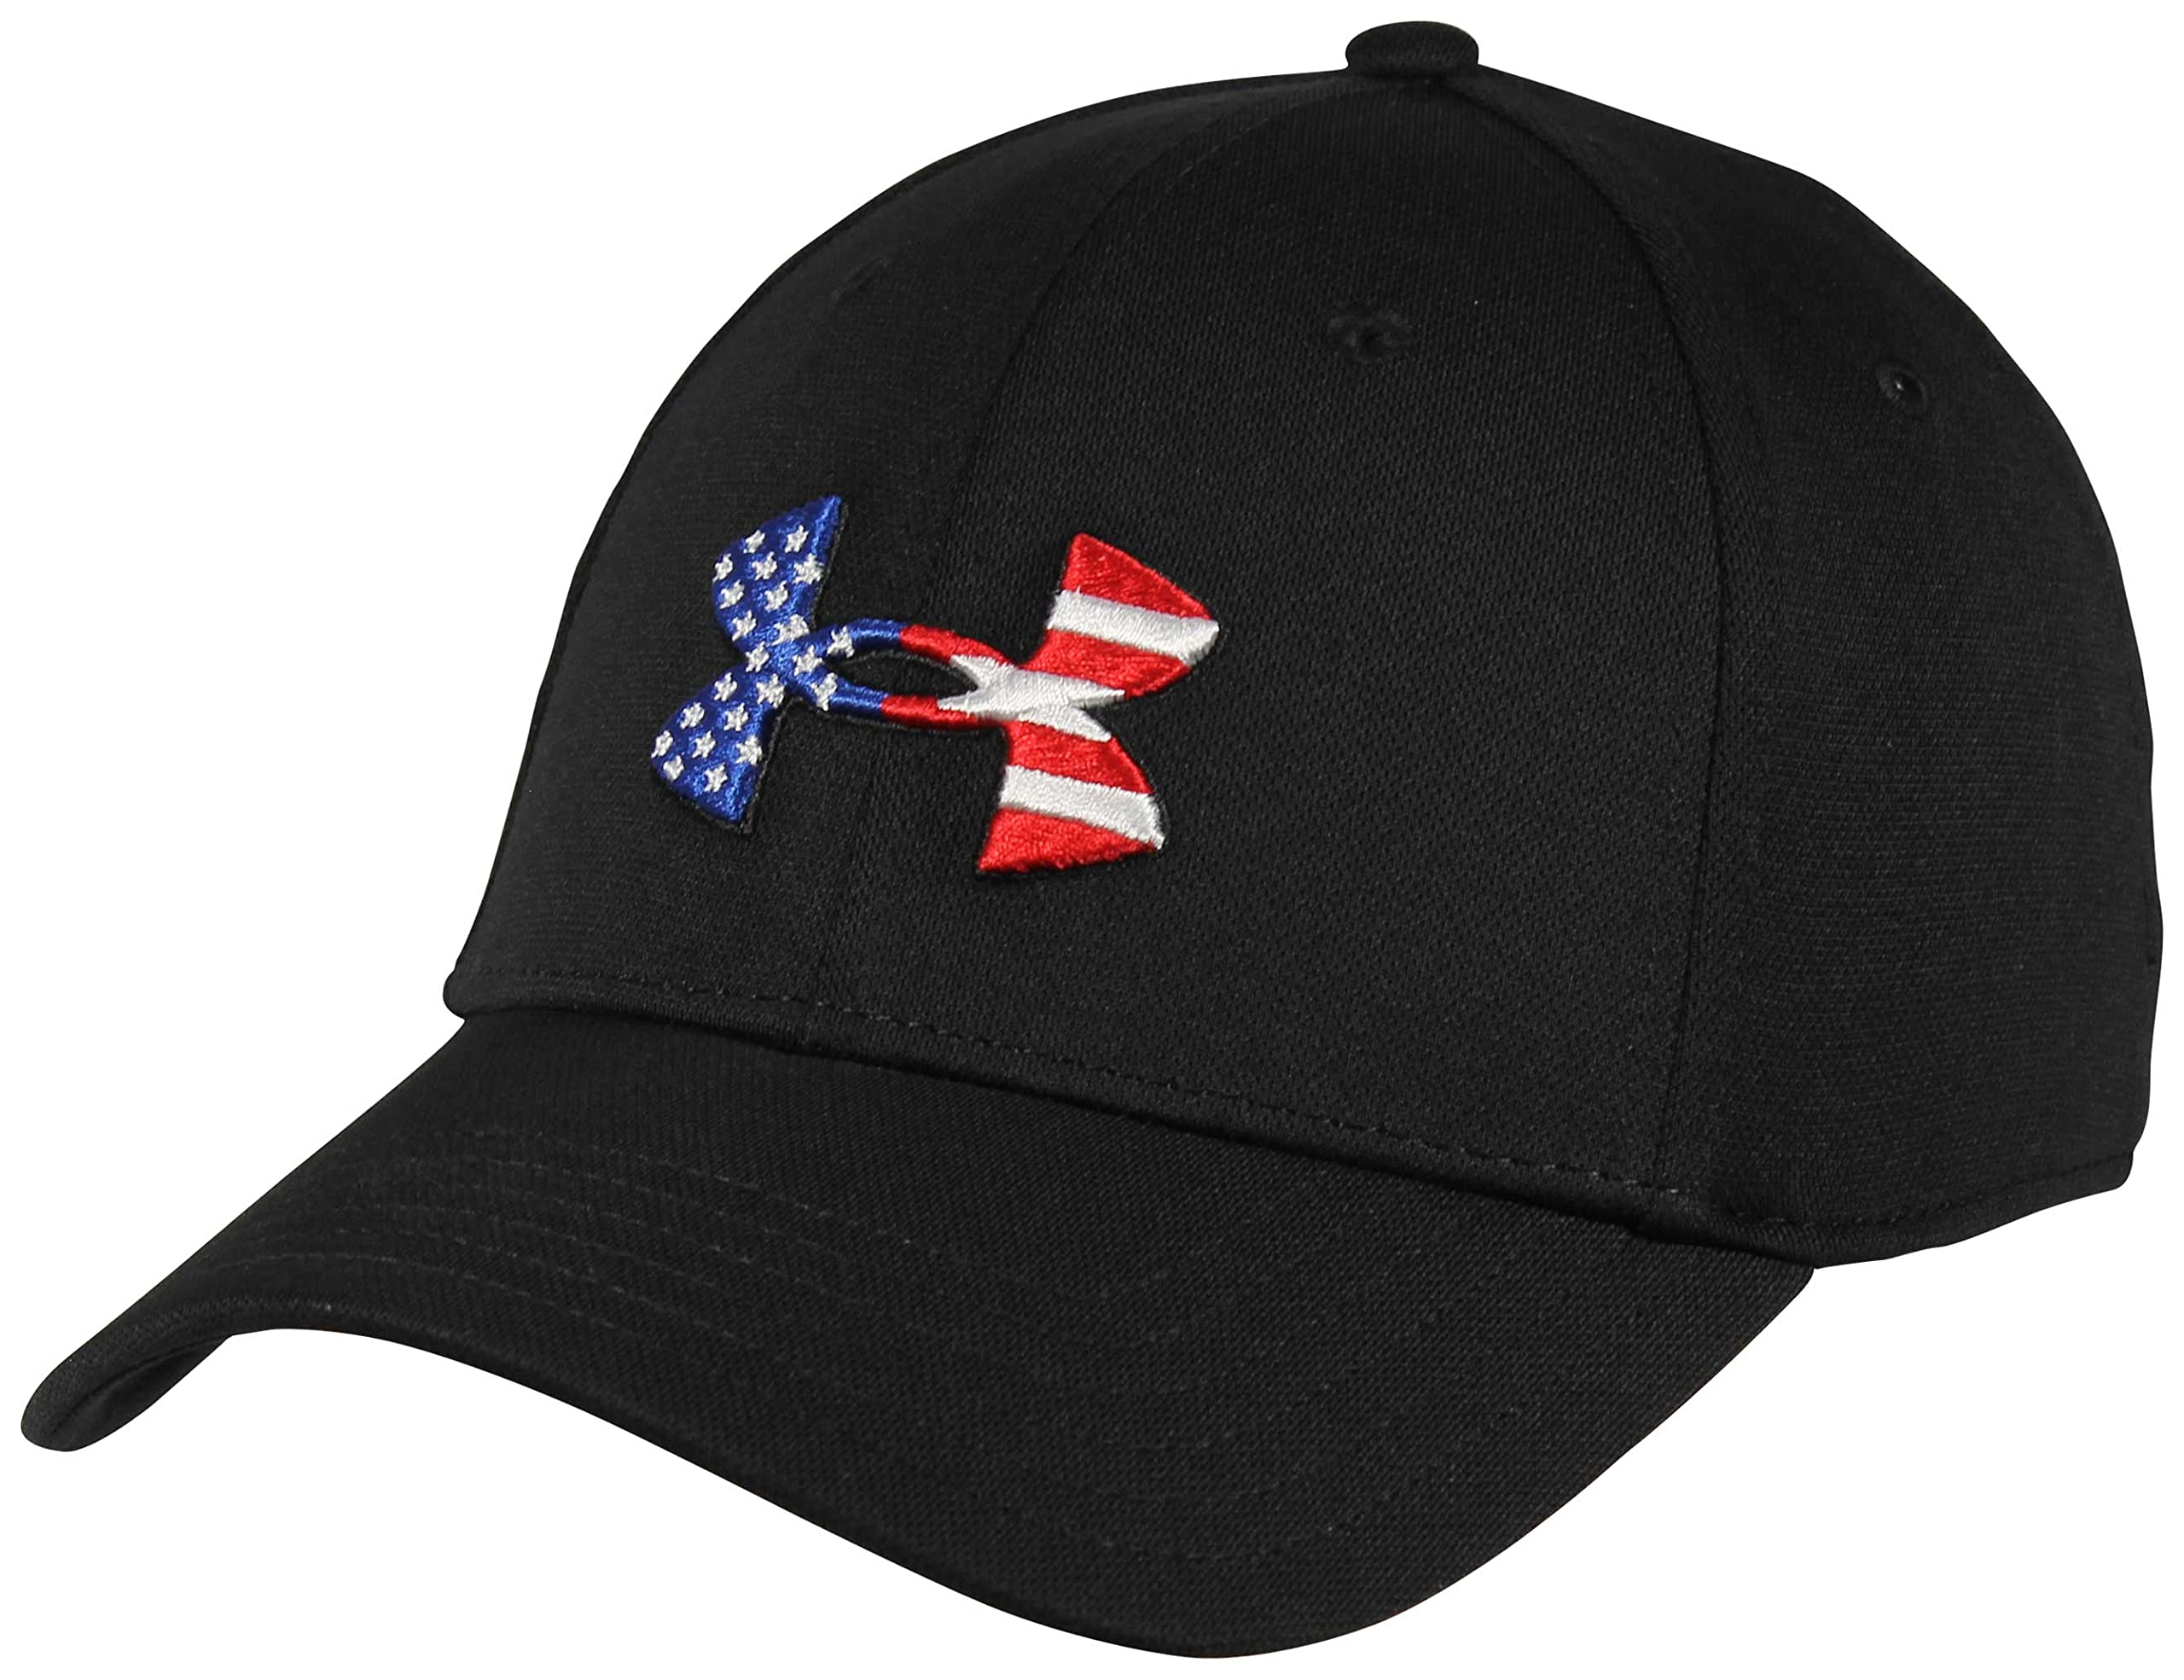 Under Armour Men's Freedom Blitzing Hat (Black) $15 + Free Shipping w/ Prime or on orders $25+